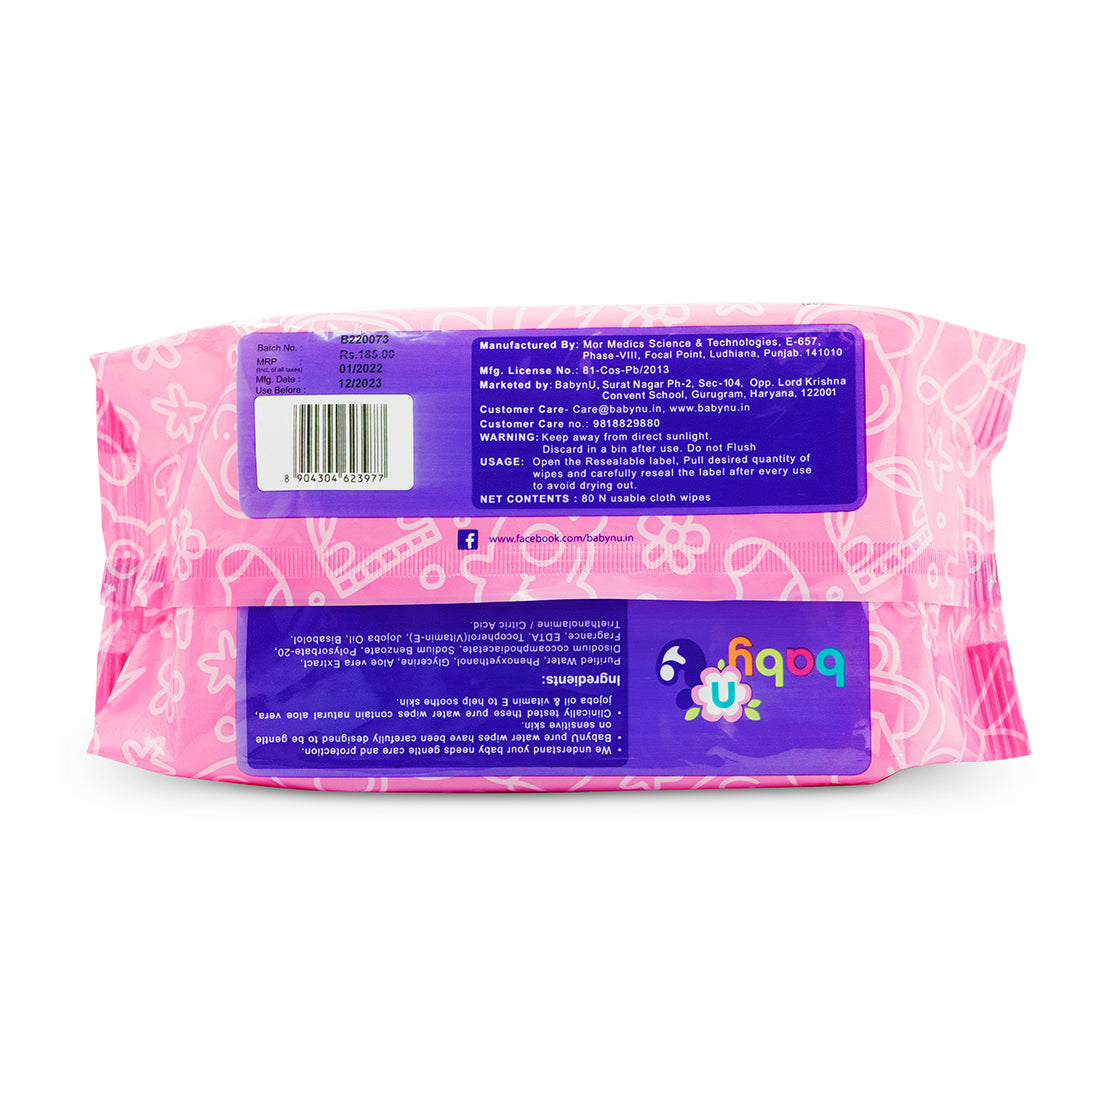 98% Pure Water Baby Wipes - Pack of 5